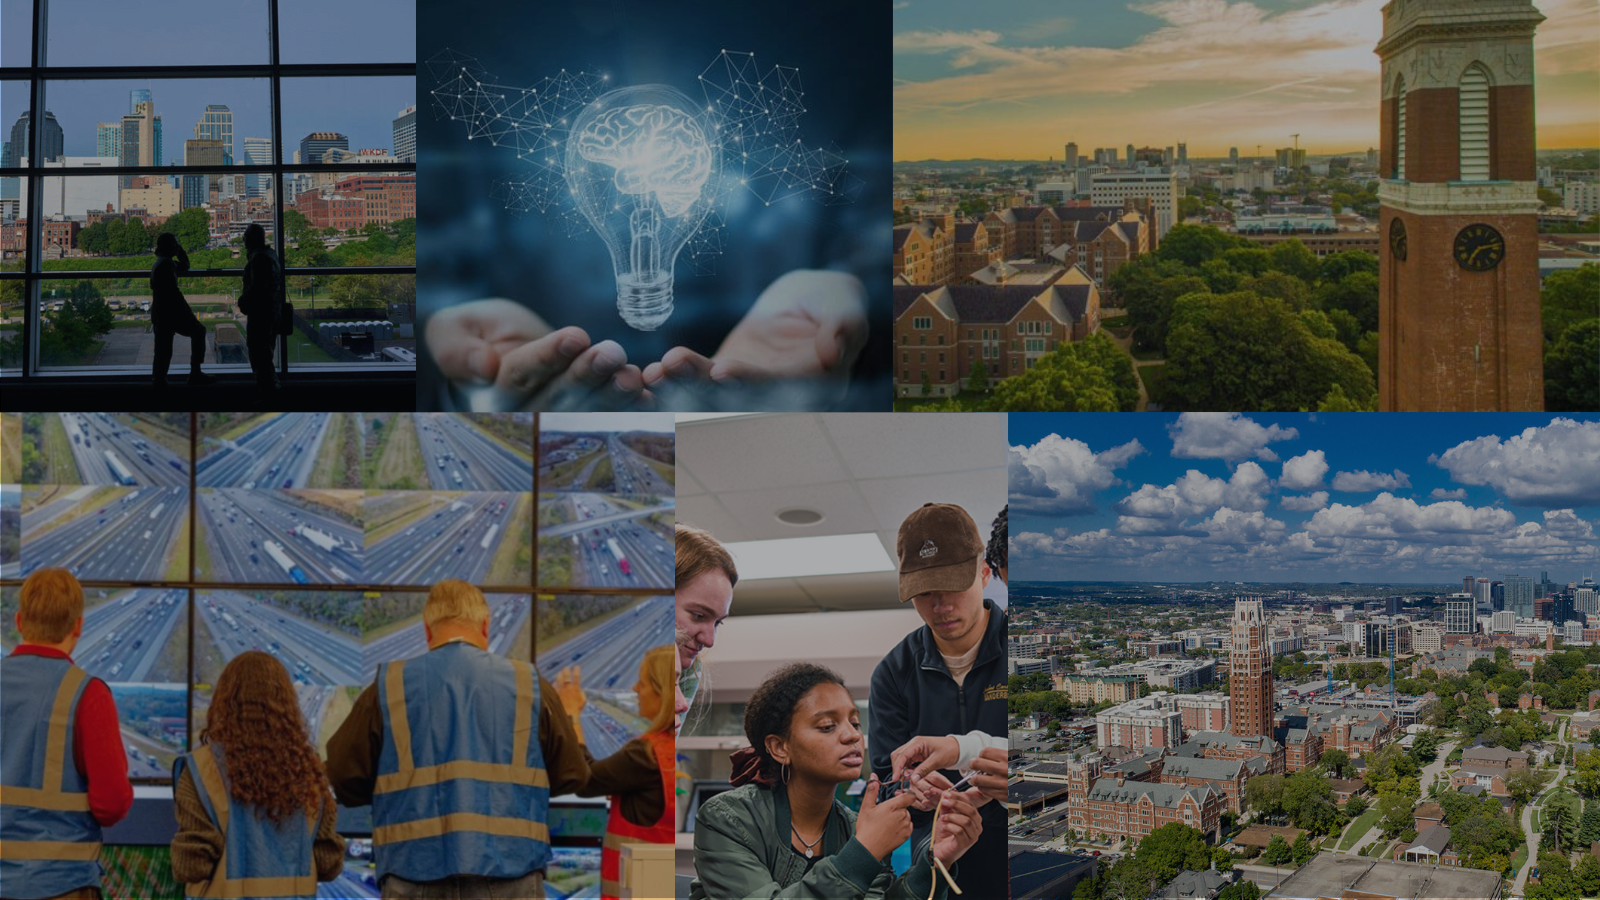 Collage of images featuring researchers, Vanderbilt's campus and downtown Nashville.